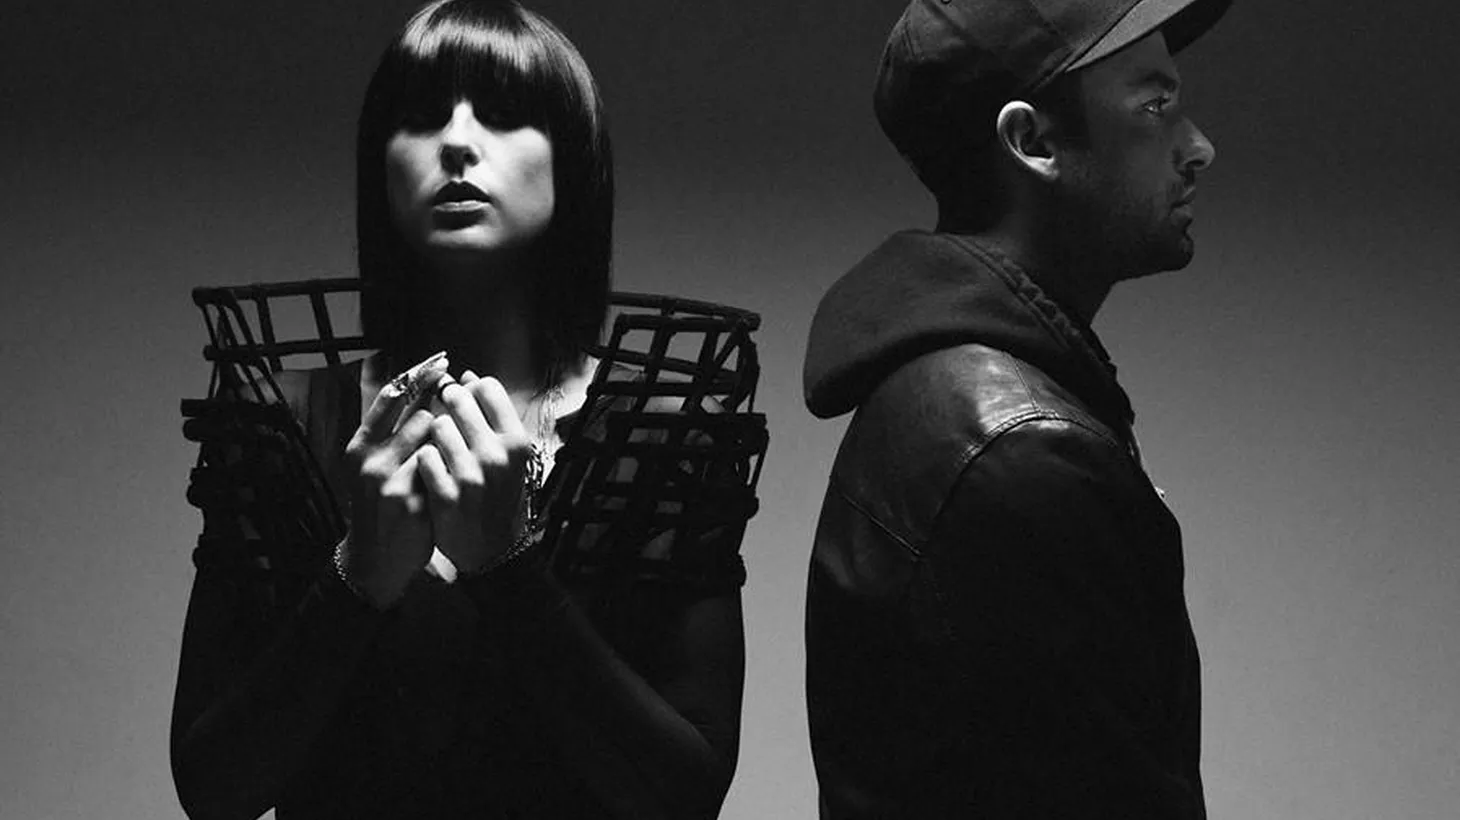 Josh Carter and Sarah Barthel, the duo behind Phantogram, have been making great music for some time but they've stepped up for their major label debut.